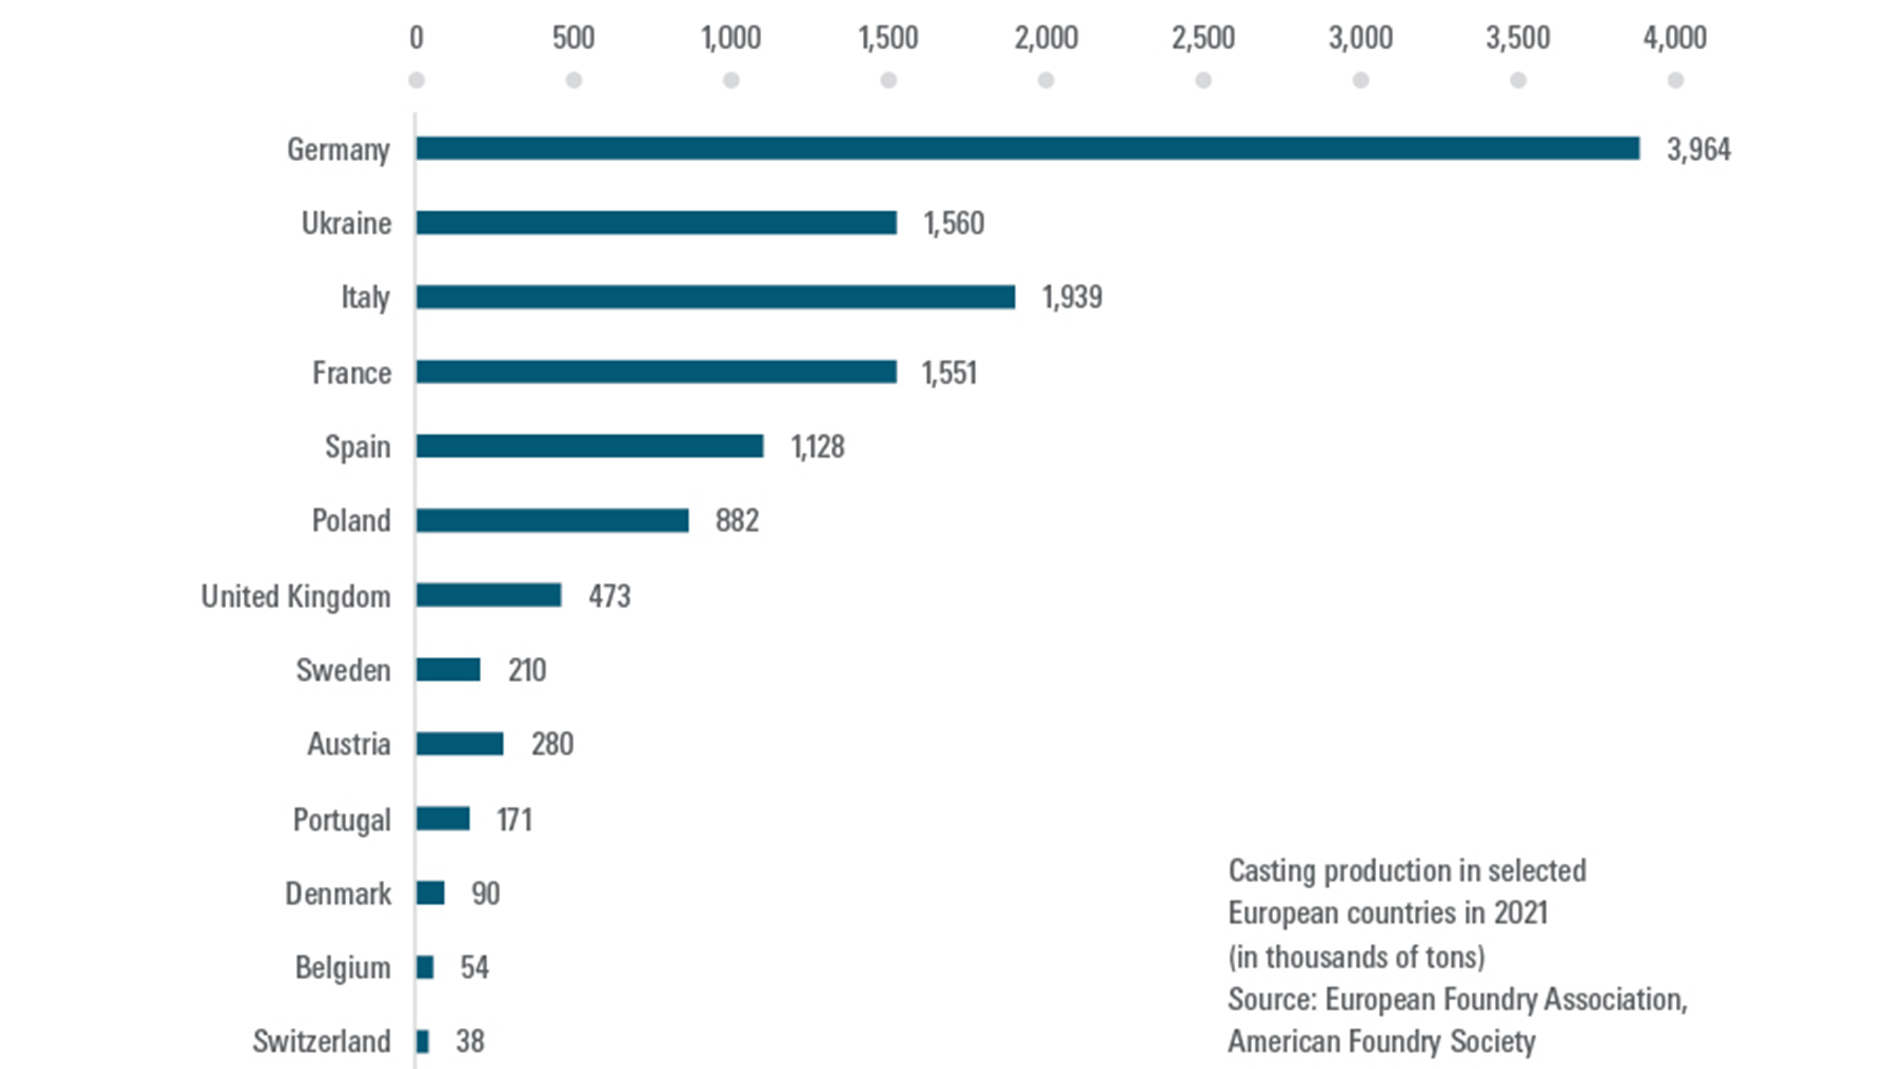 Casting production in selected European countries in 2021 (in thousands of tons) Source: European Foundry Association, American Foundry Society